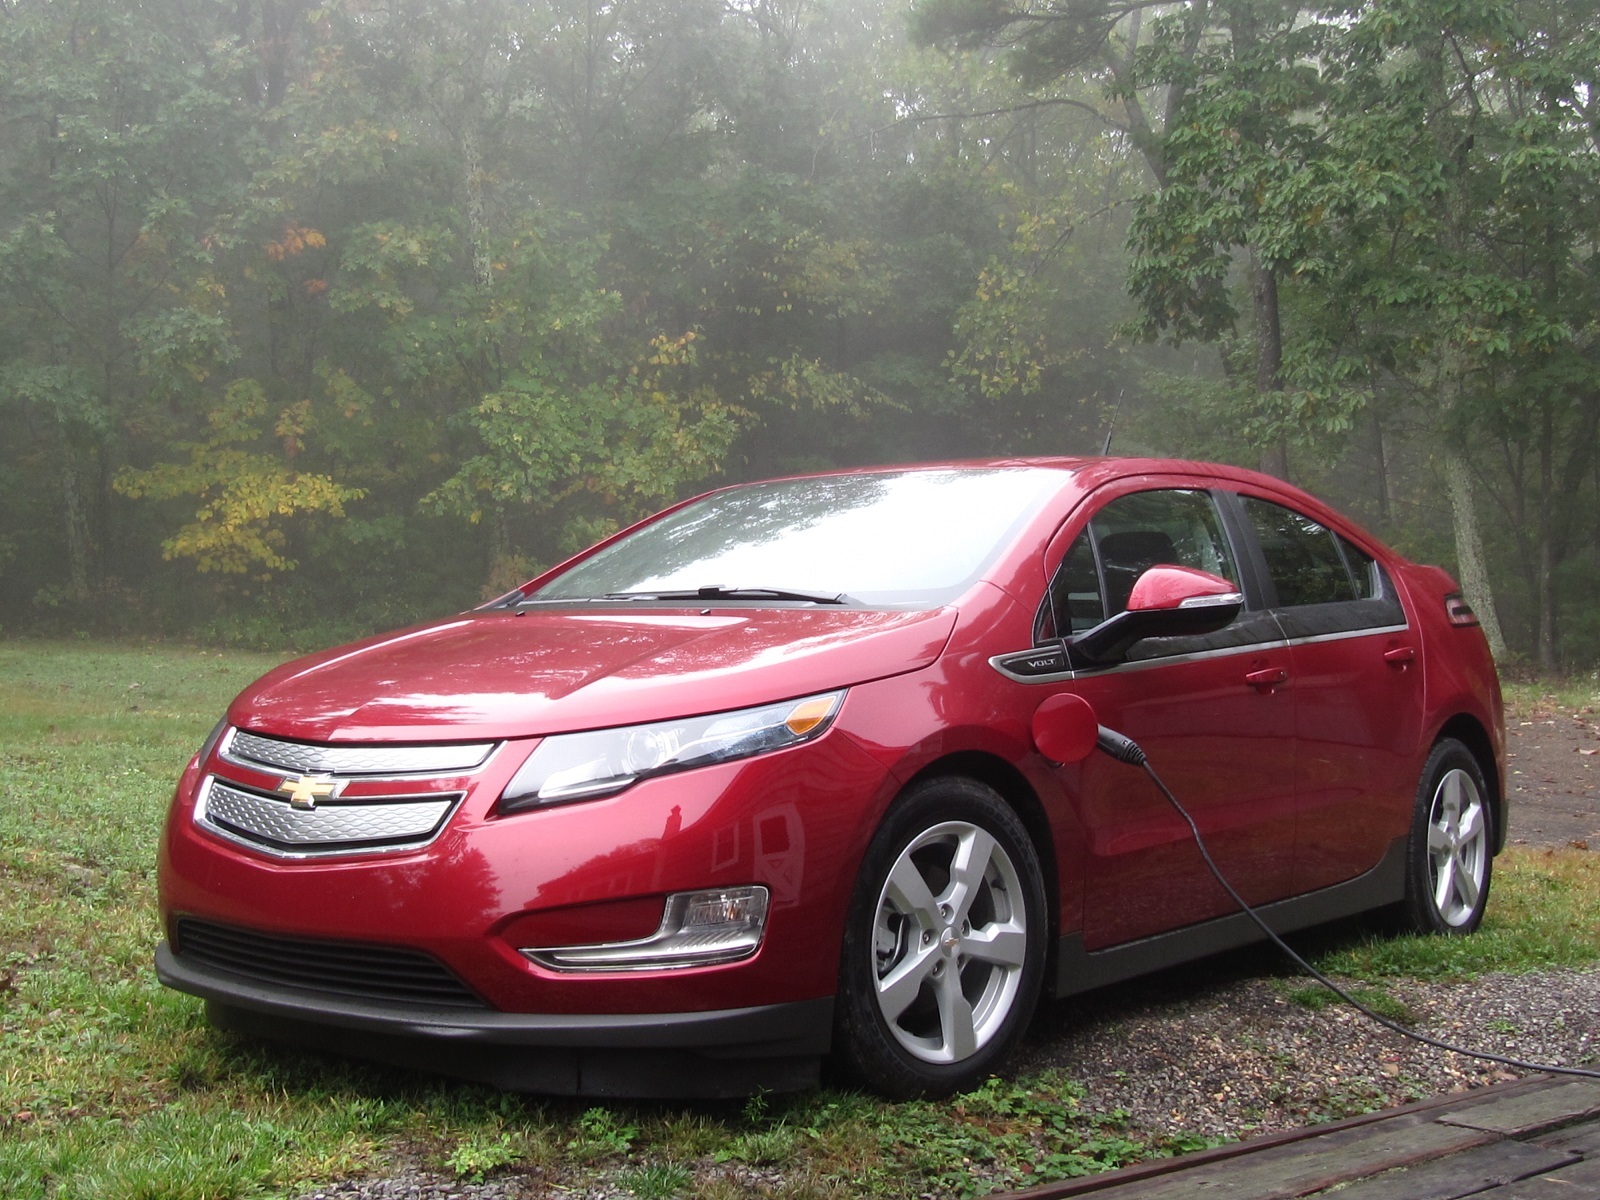 2013 Chevy Volt Software Update Required To Avert Delayed ...